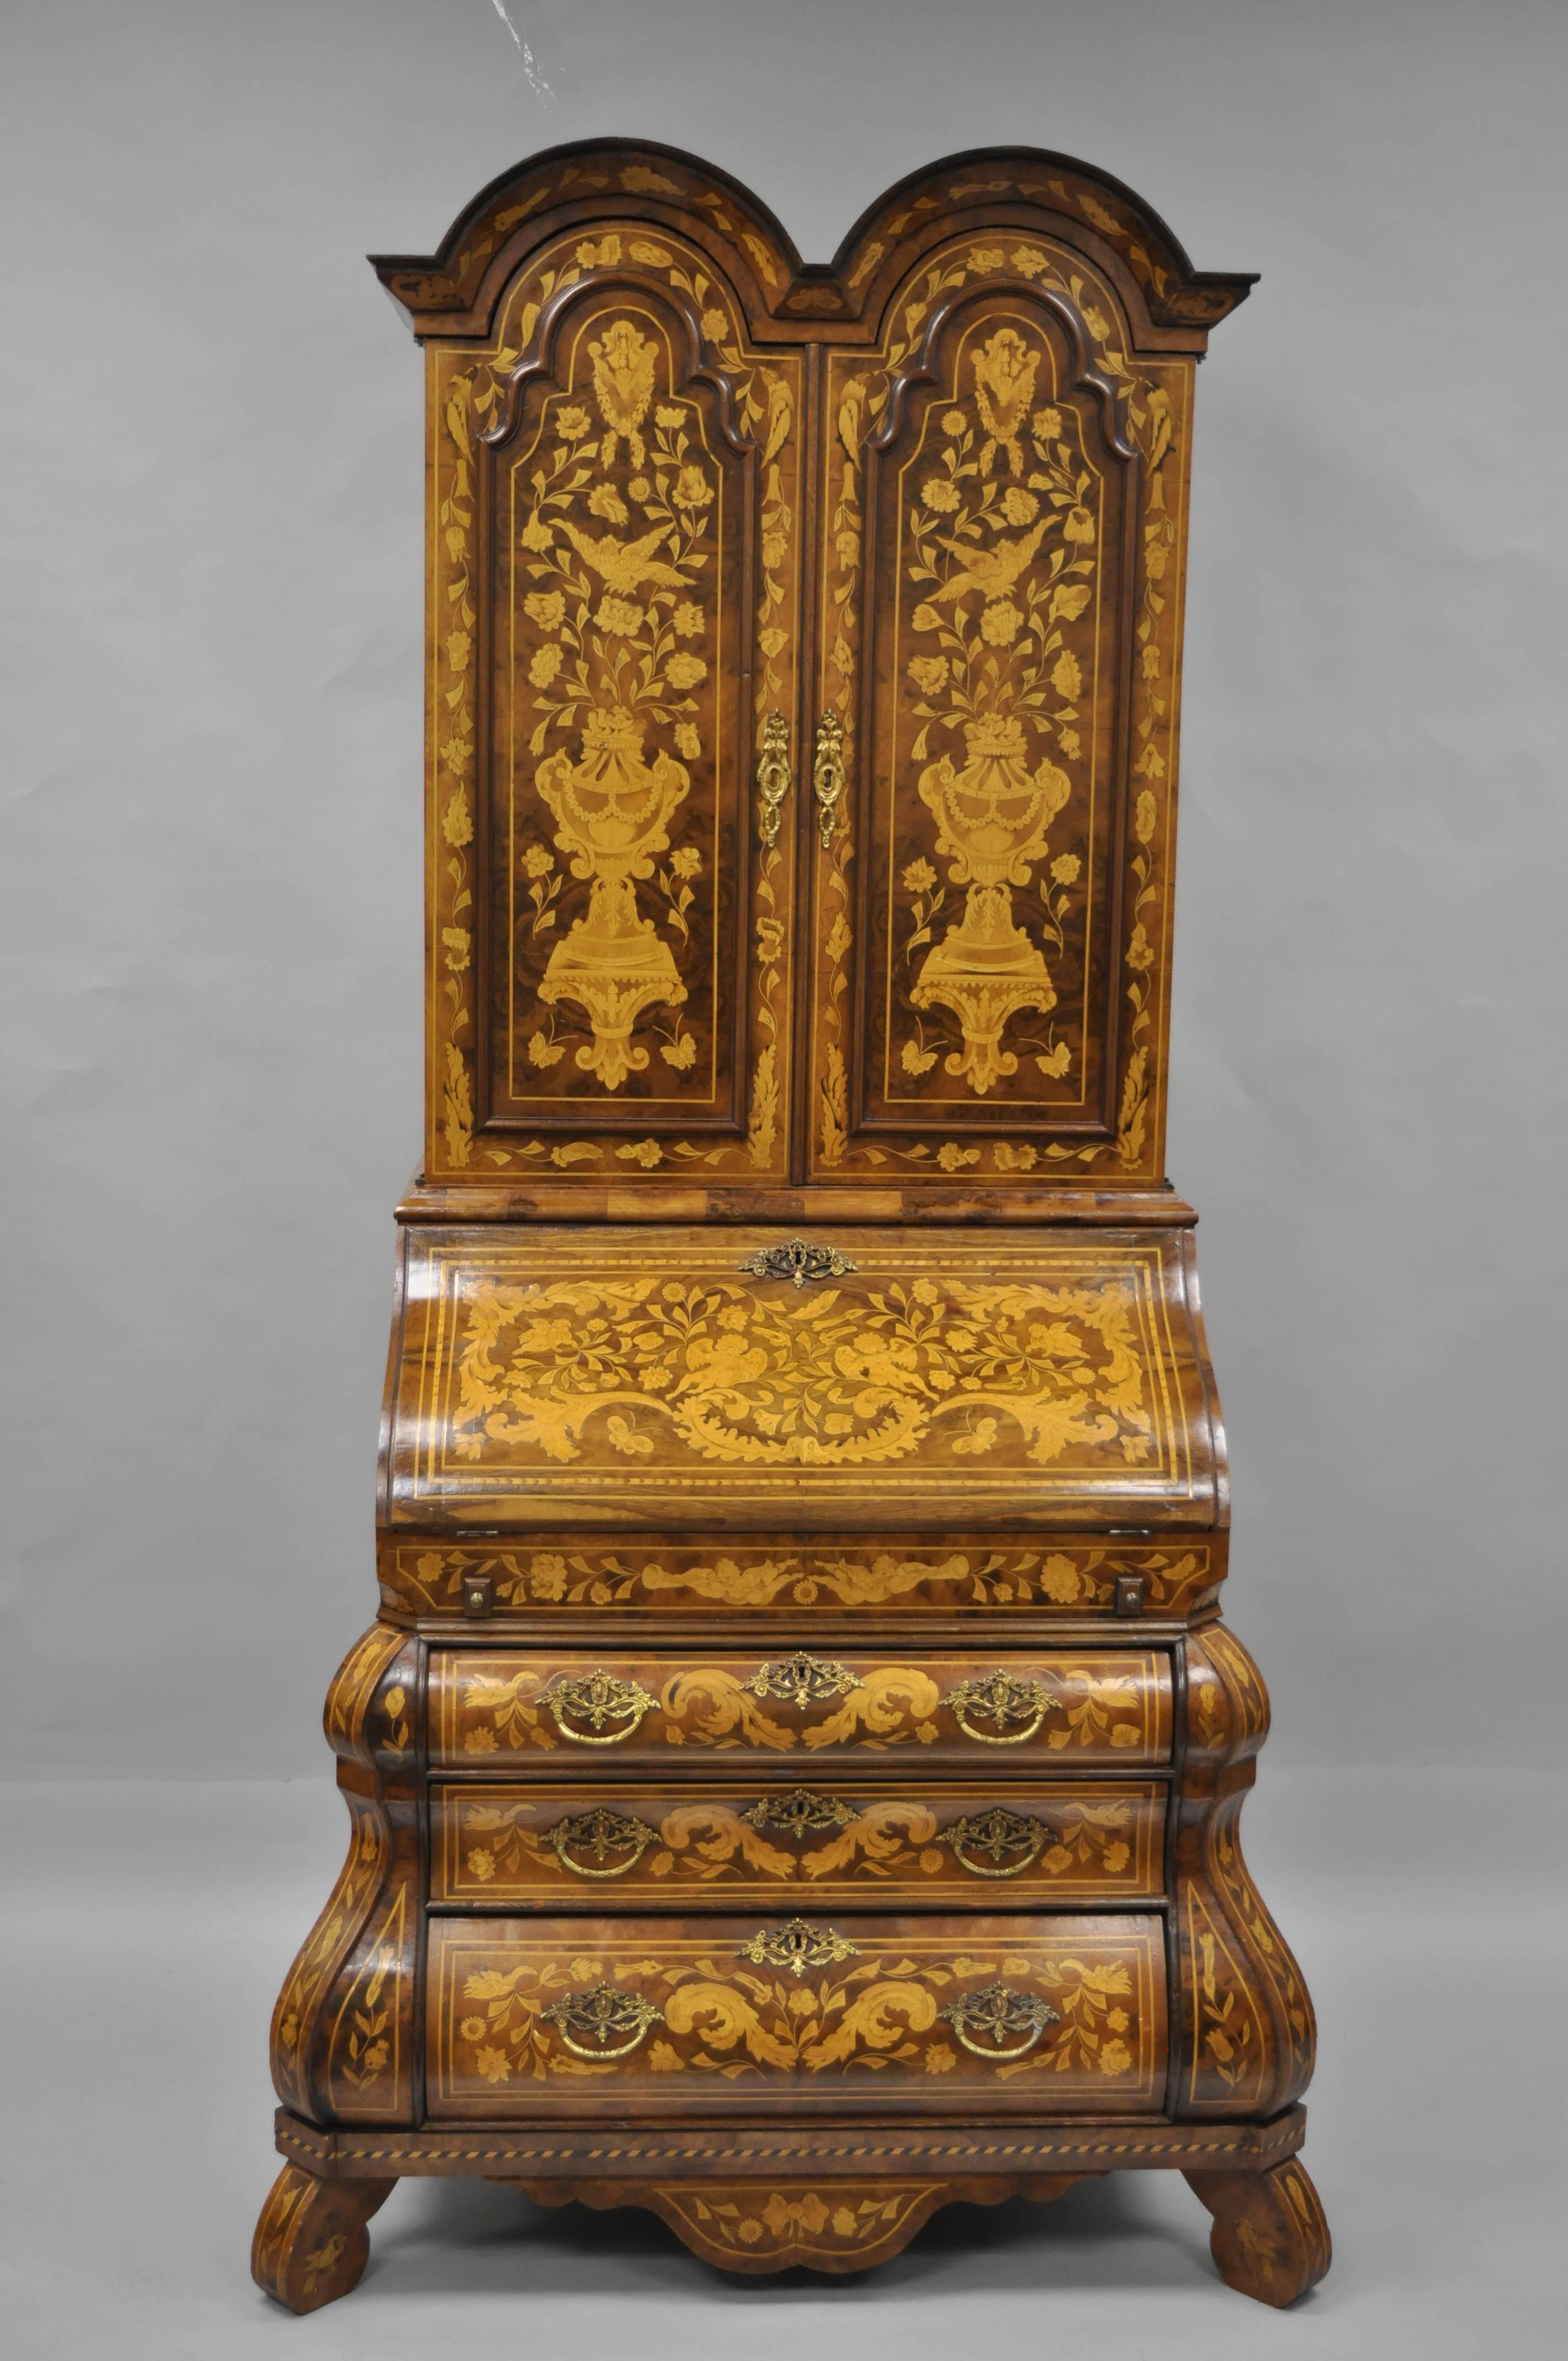 Truly impressive, mid-20th century, Dutch marquetry style inlaid and burl wood secretary desk. Item is inlaid from top to bottom including the front, sides, and interior with varying floral scroll work, flowers, winged cherubs, oxen, urns and